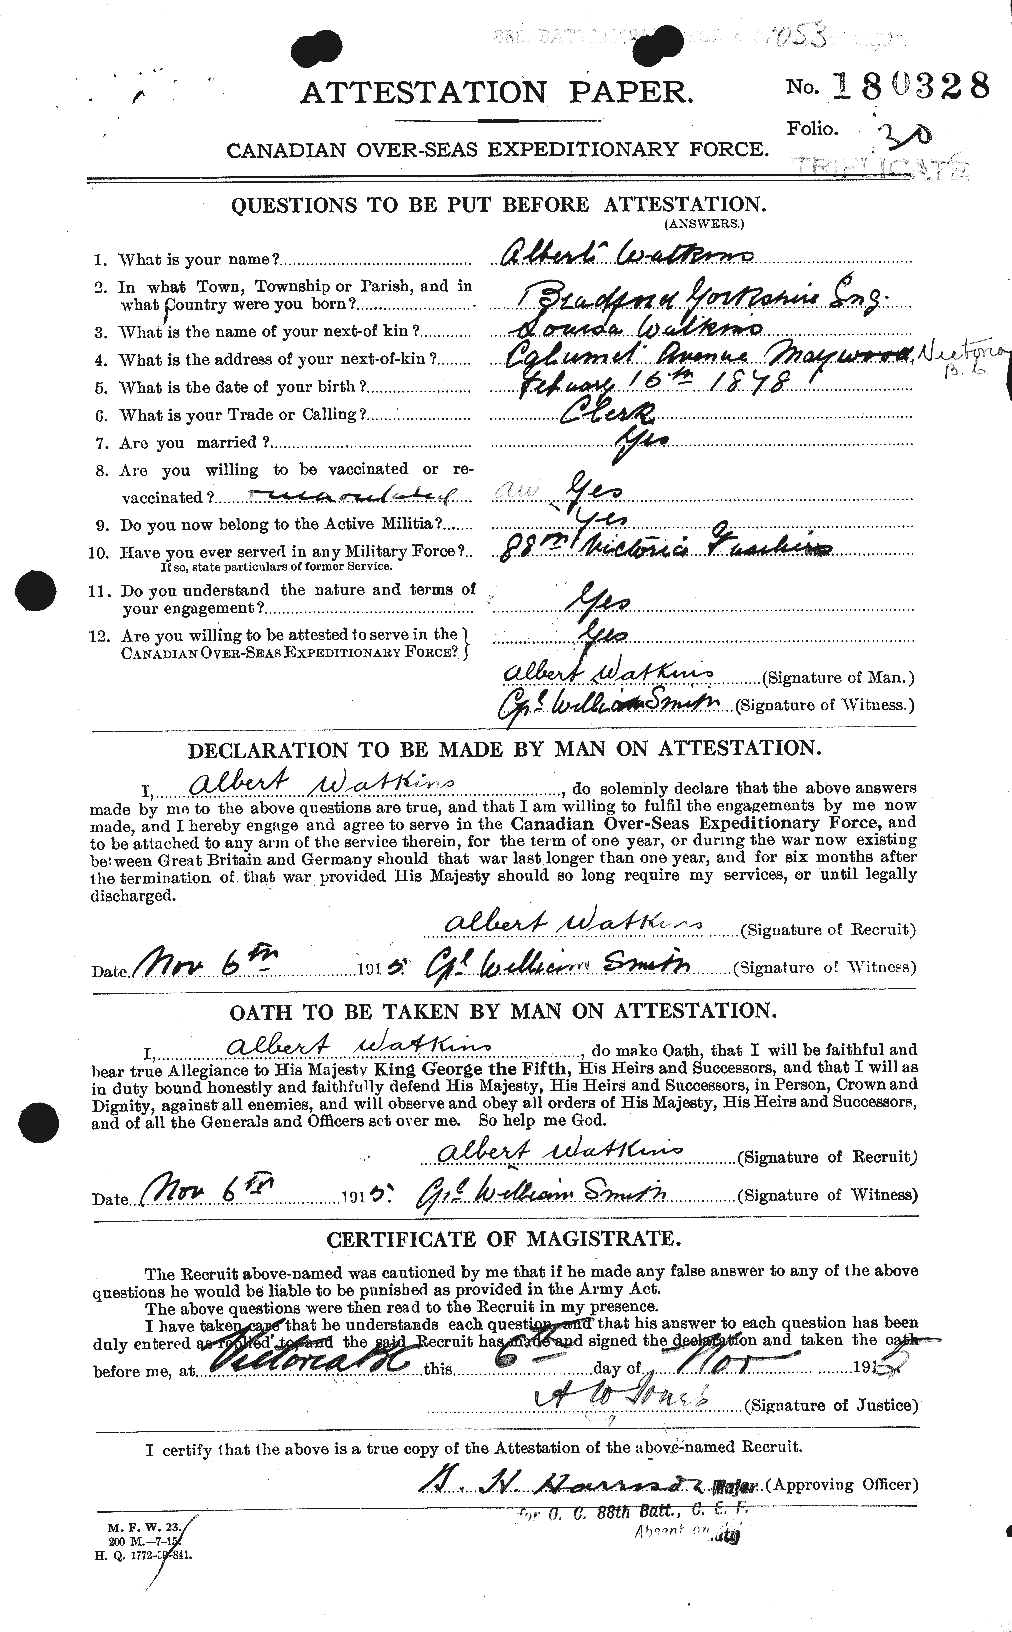 Personnel Records of the First World War - CEF 659149a